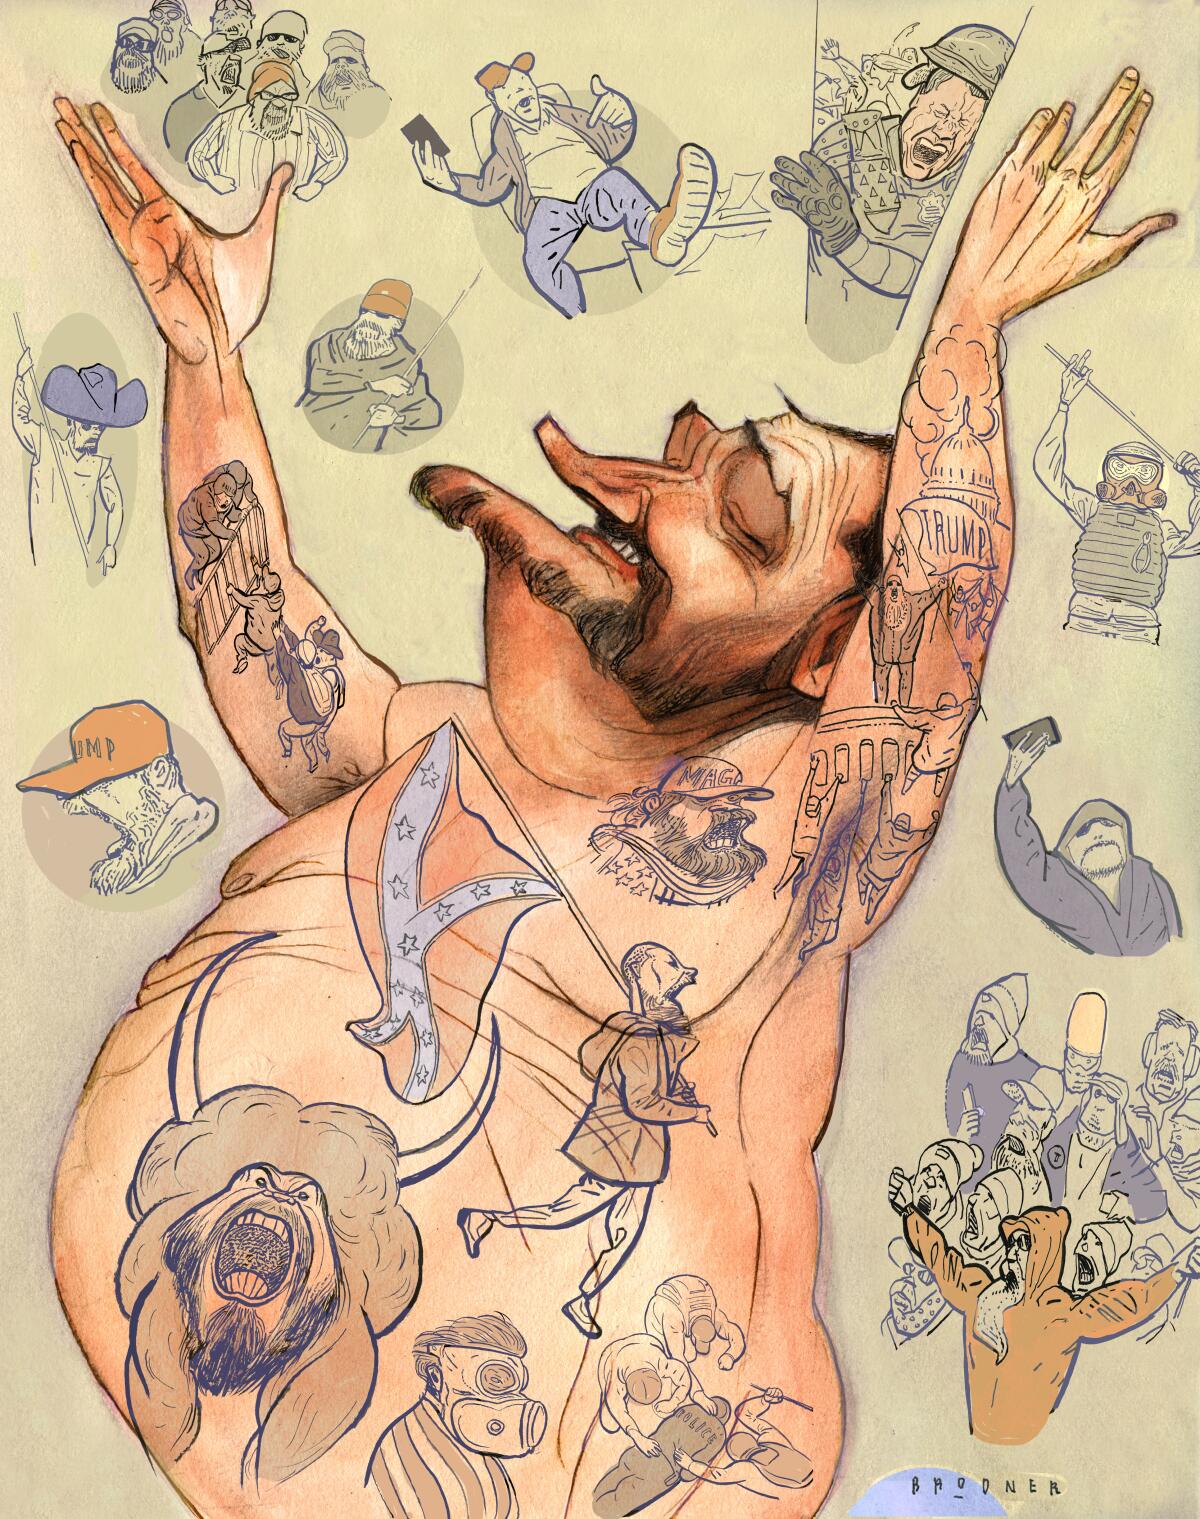 Caricature of Ted Cruz with torso tattooed with images from Jan. 6 Capitol attack